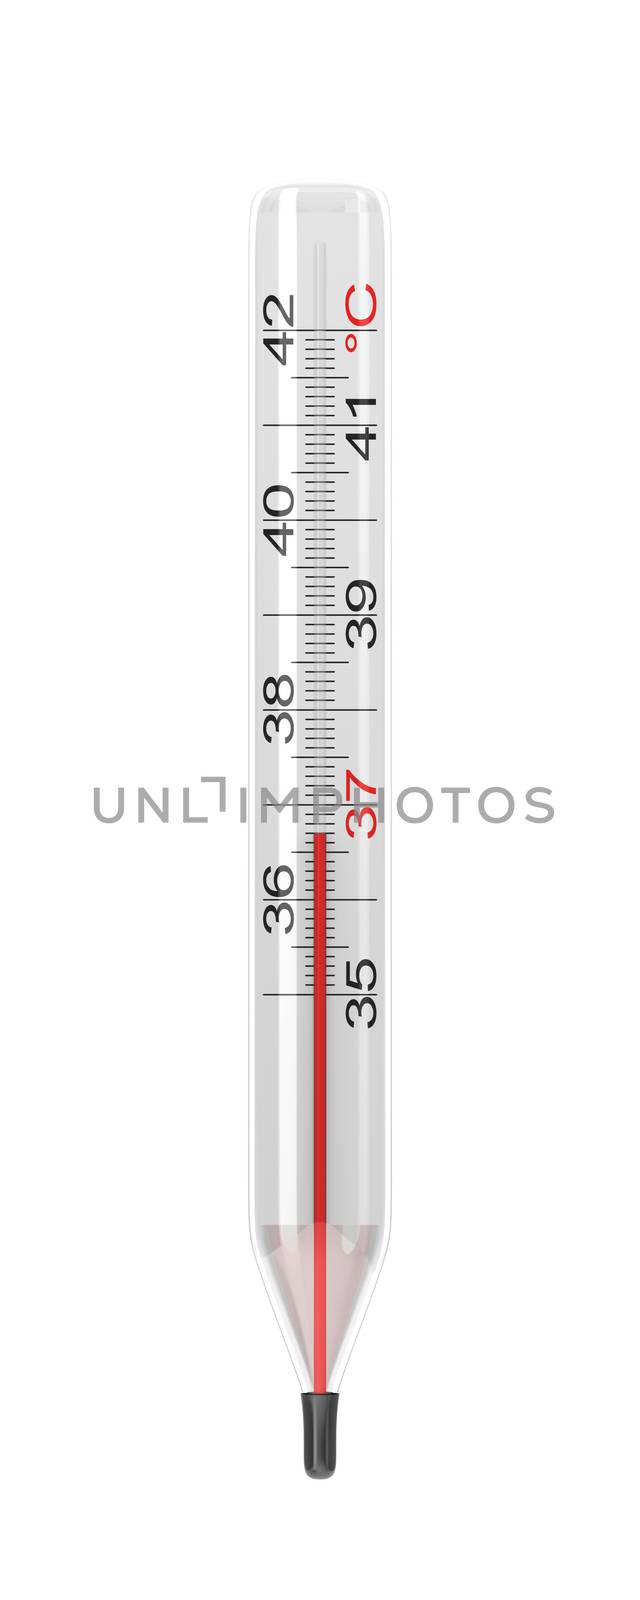 Clinical Thermometer Isolated on White Illustration